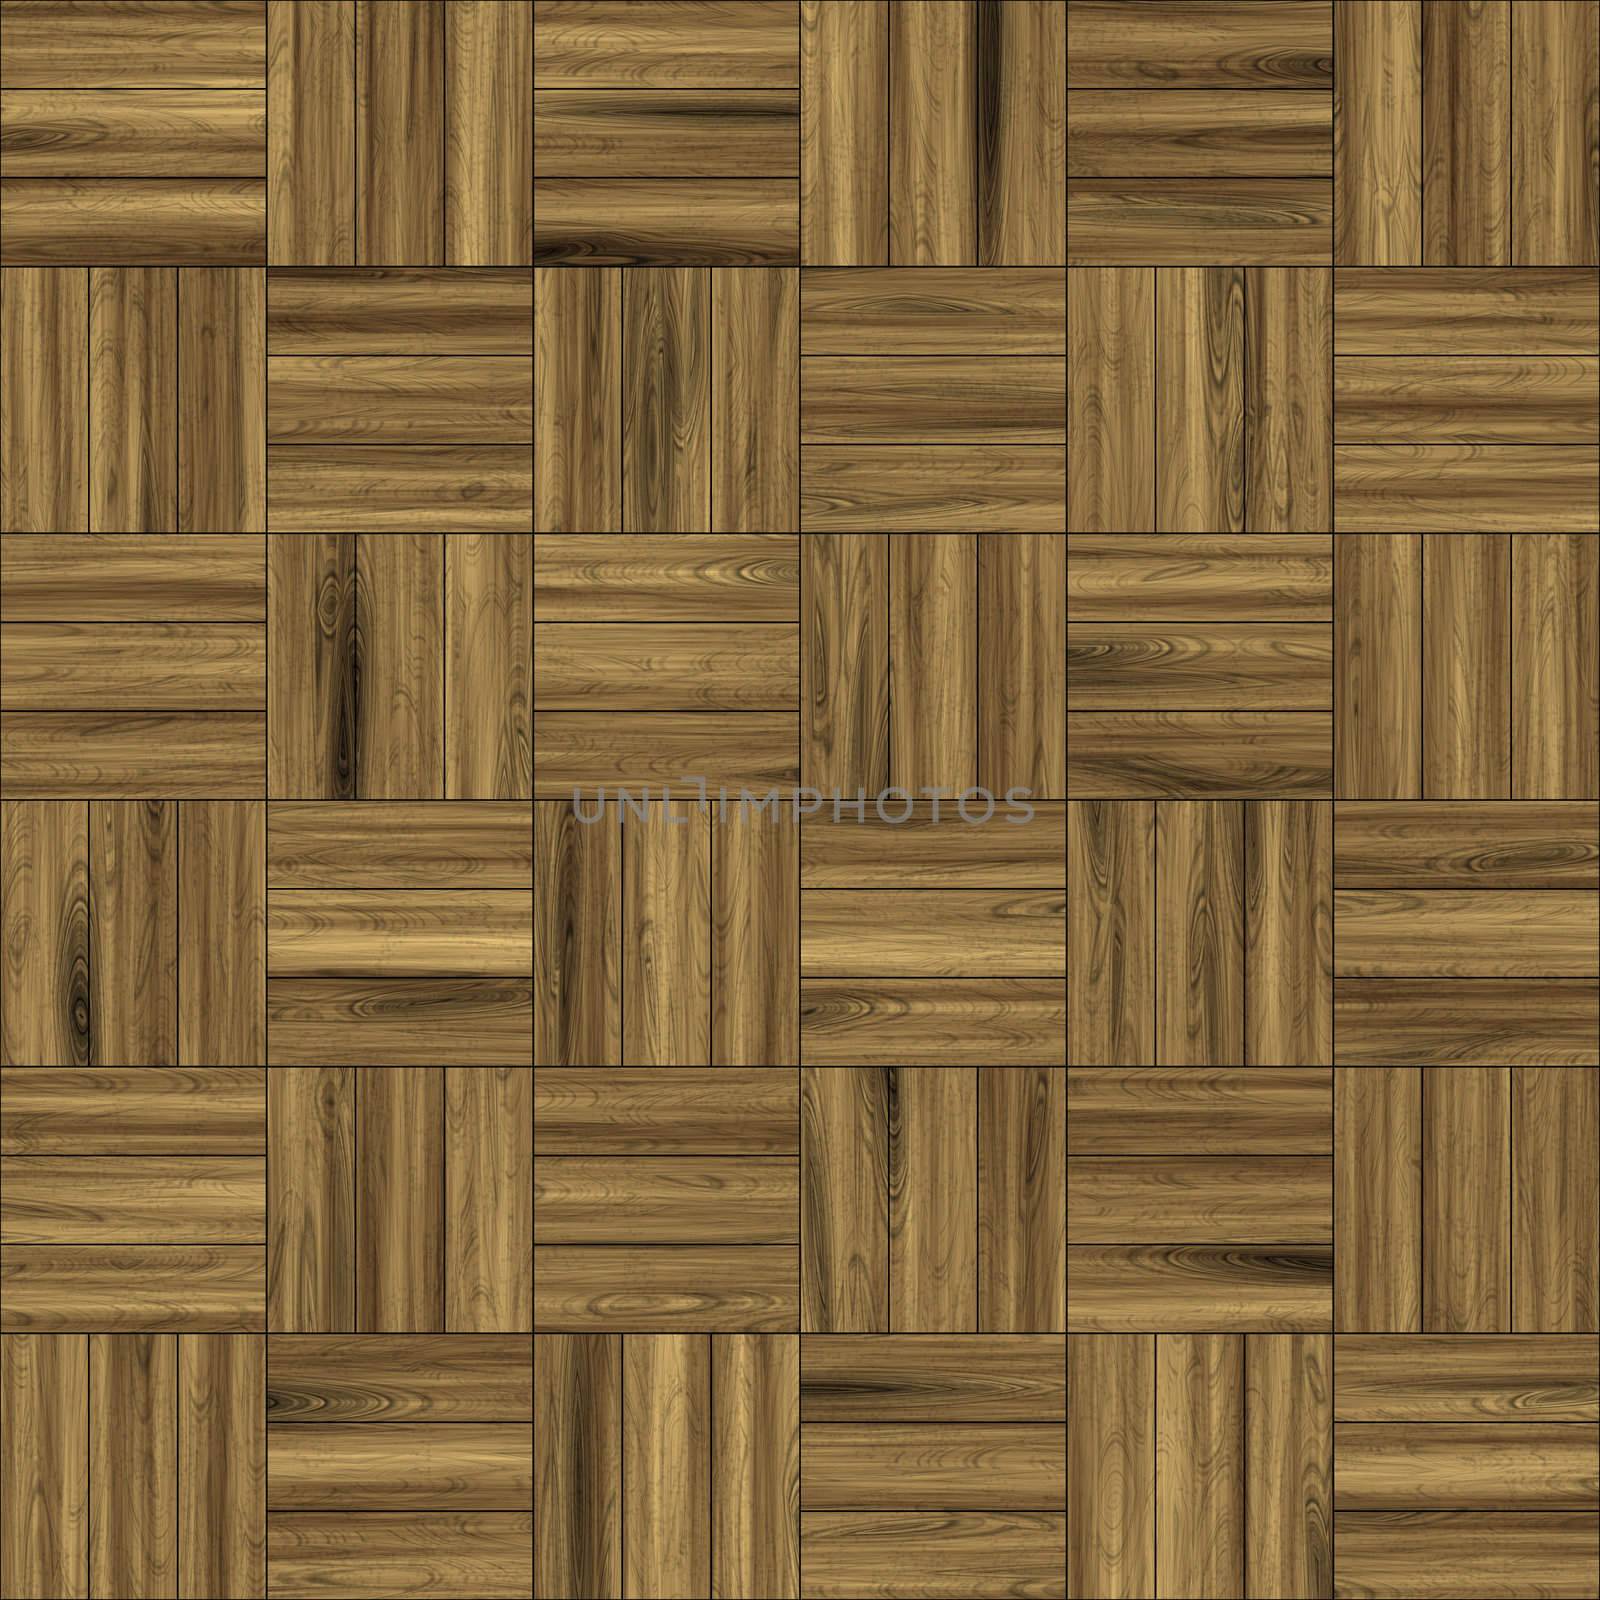 An illustration of a nice seamless wood texture